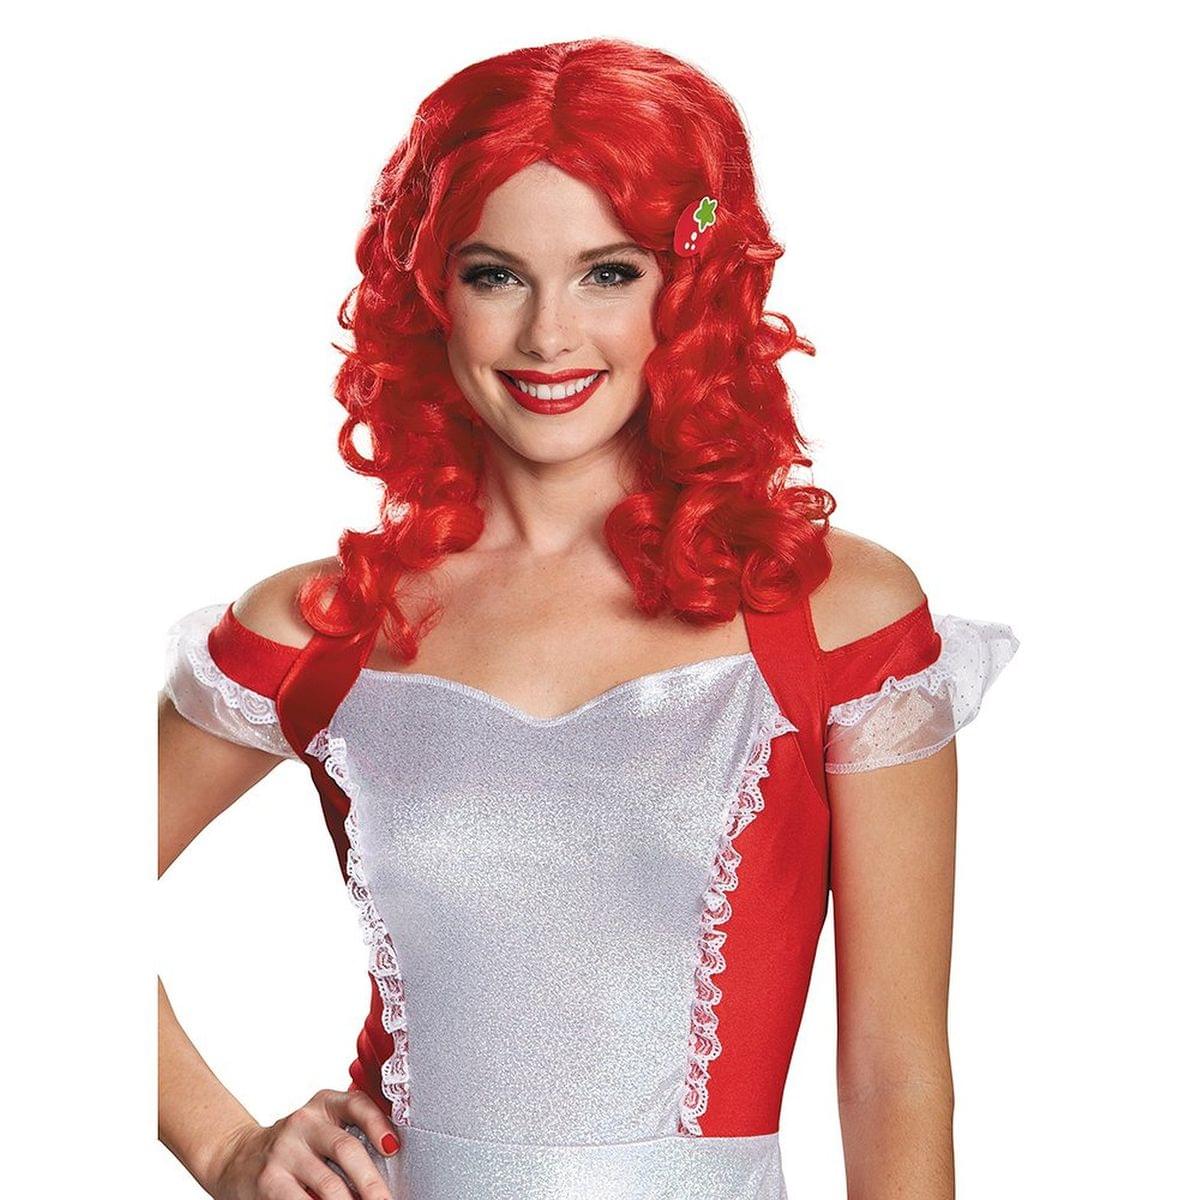 Stawberry Shortcake Deluxe Adult Costume Wig One Size